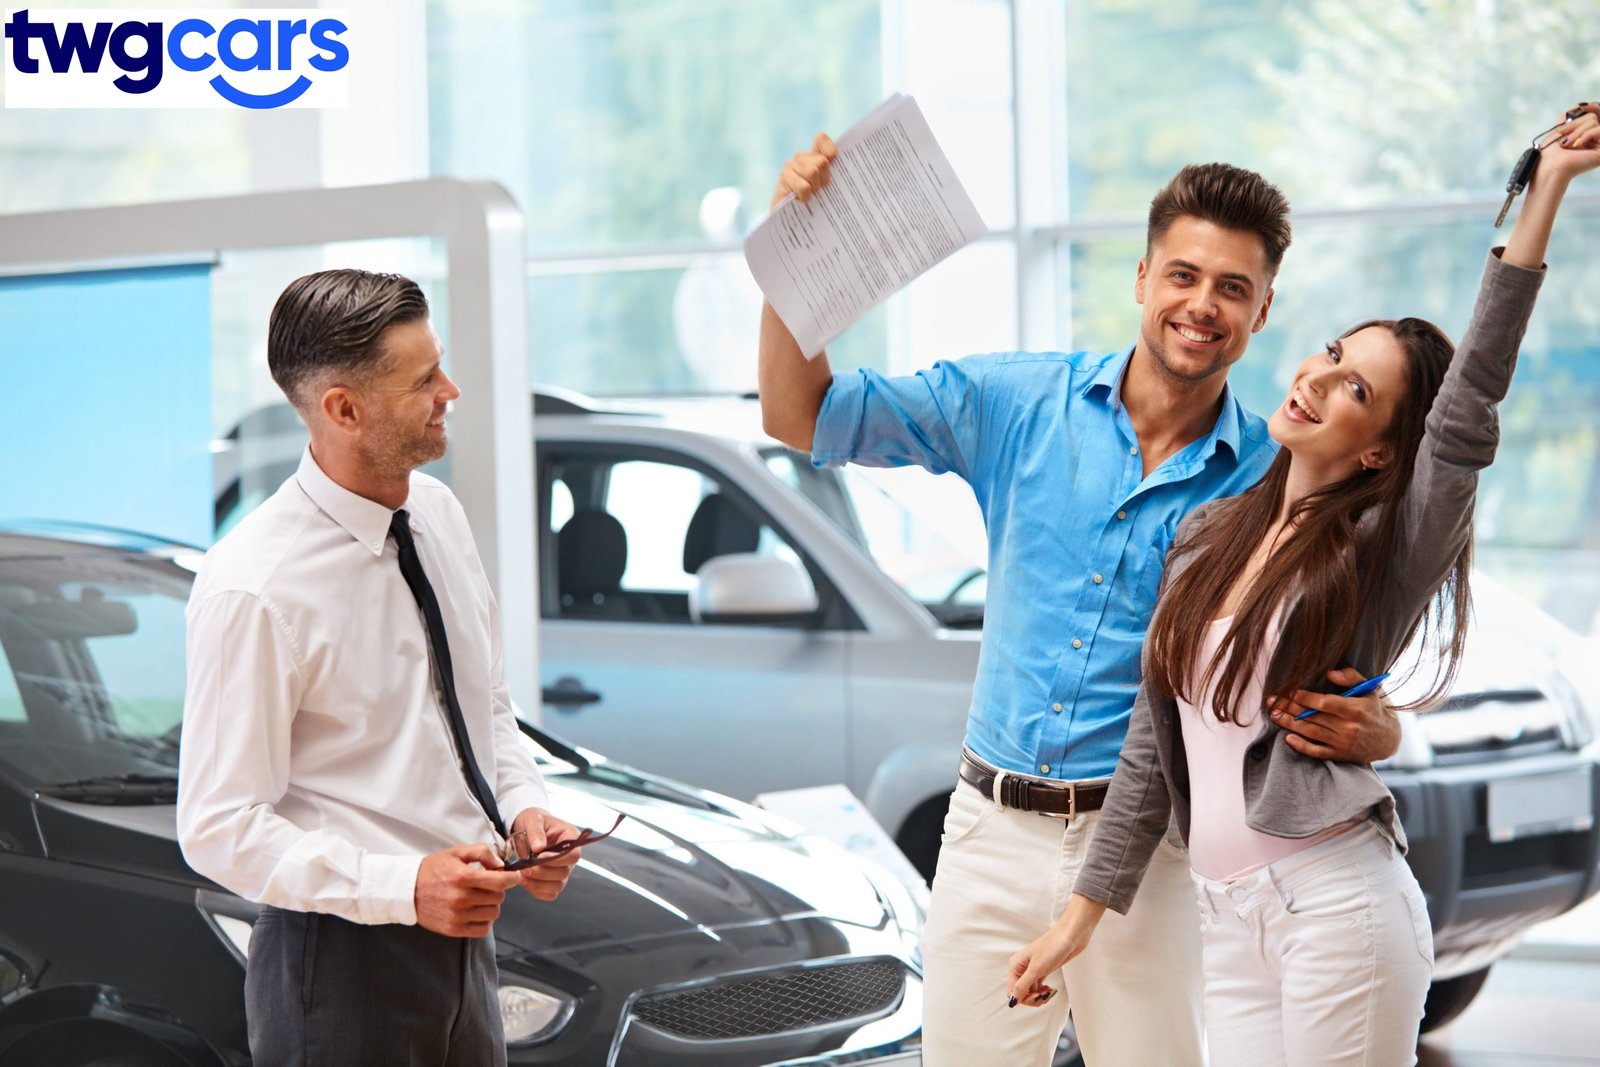 How to Avoid Scams When Buying a Used Car?